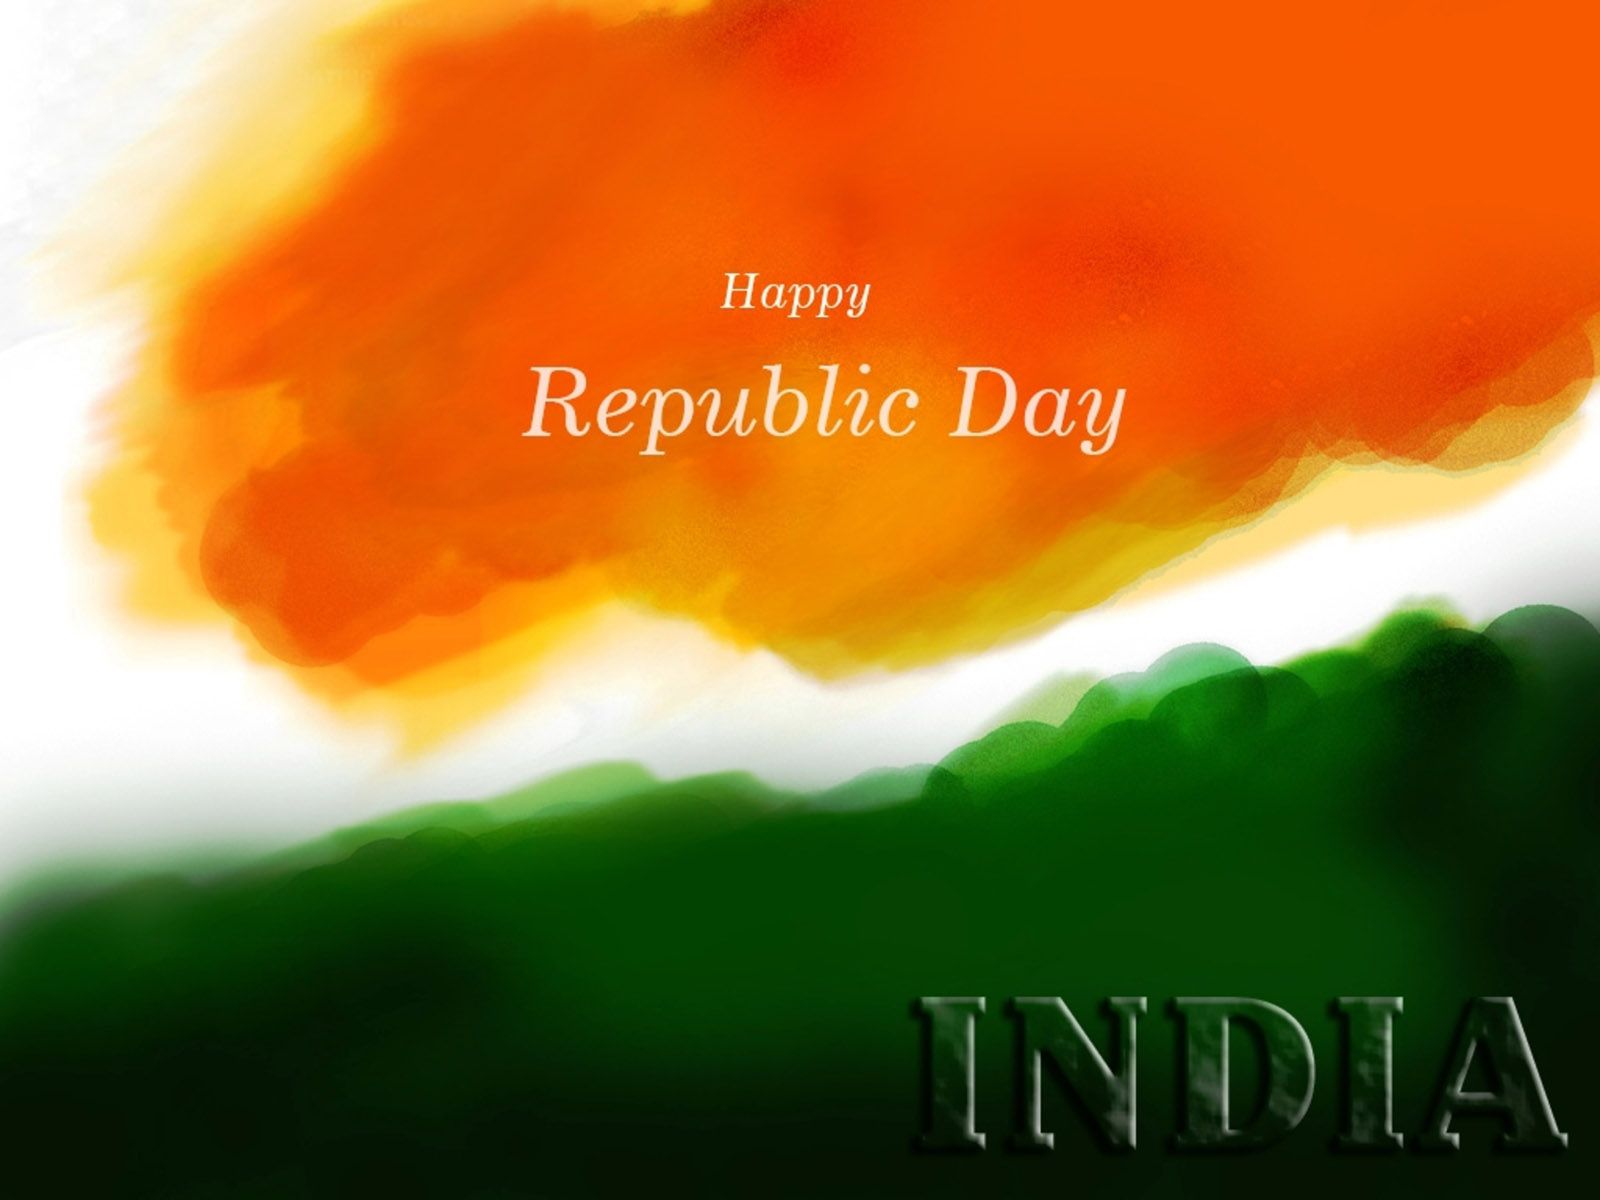 Happy Republic Day 2021 Image, Picture, Wallpaper January